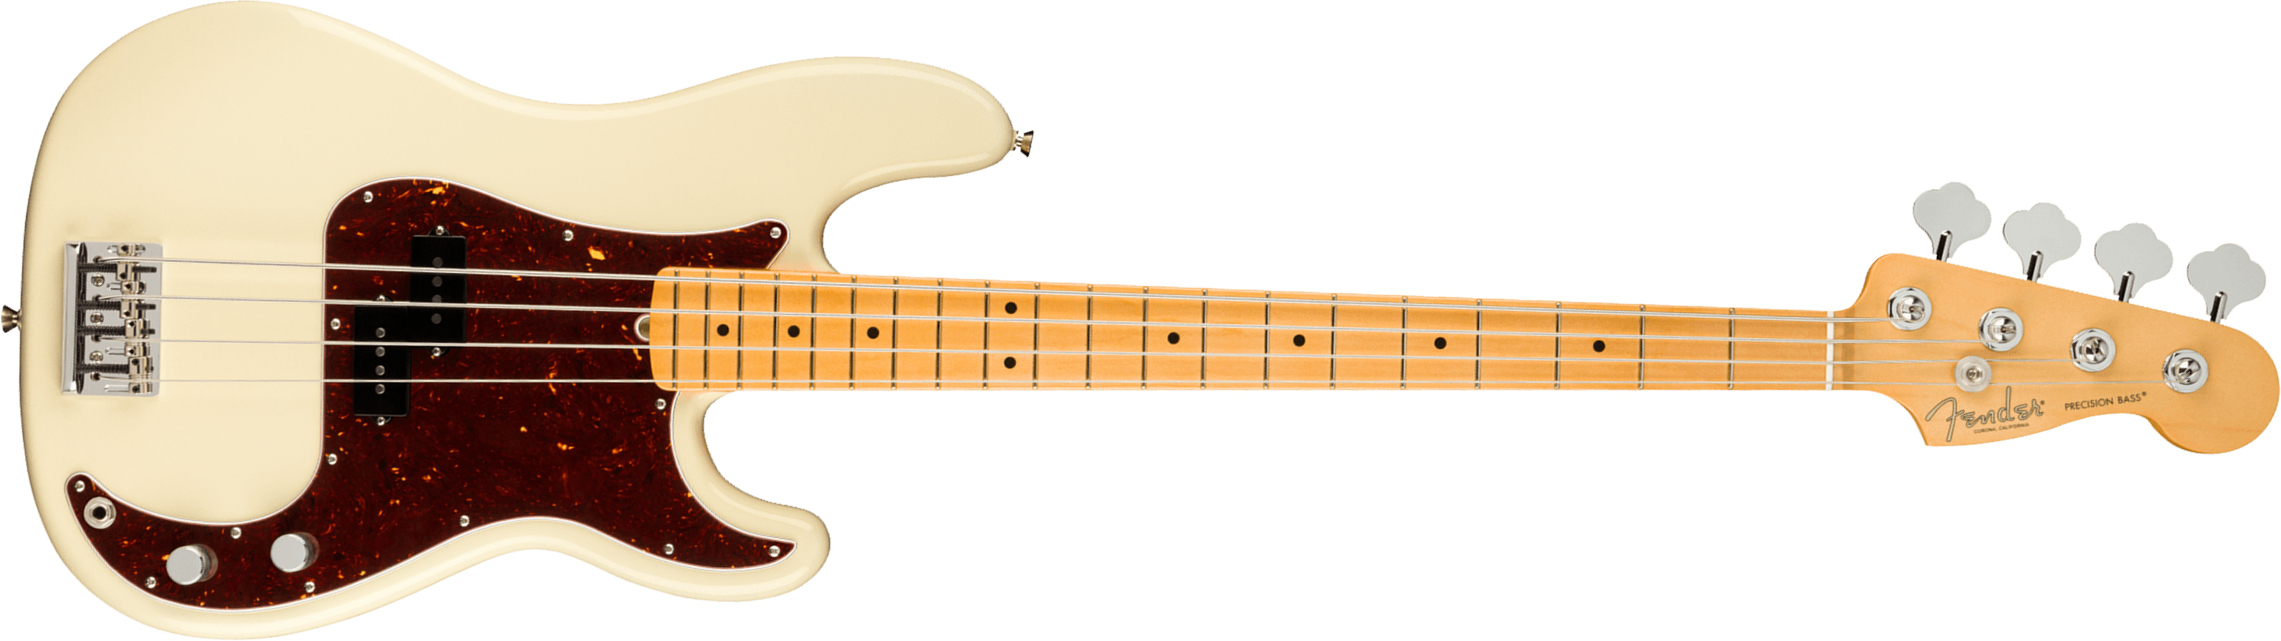 Fender Precision Bass American Professional Ii Usa Mn - Olympic White - Solid body elektrische bas - Main picture